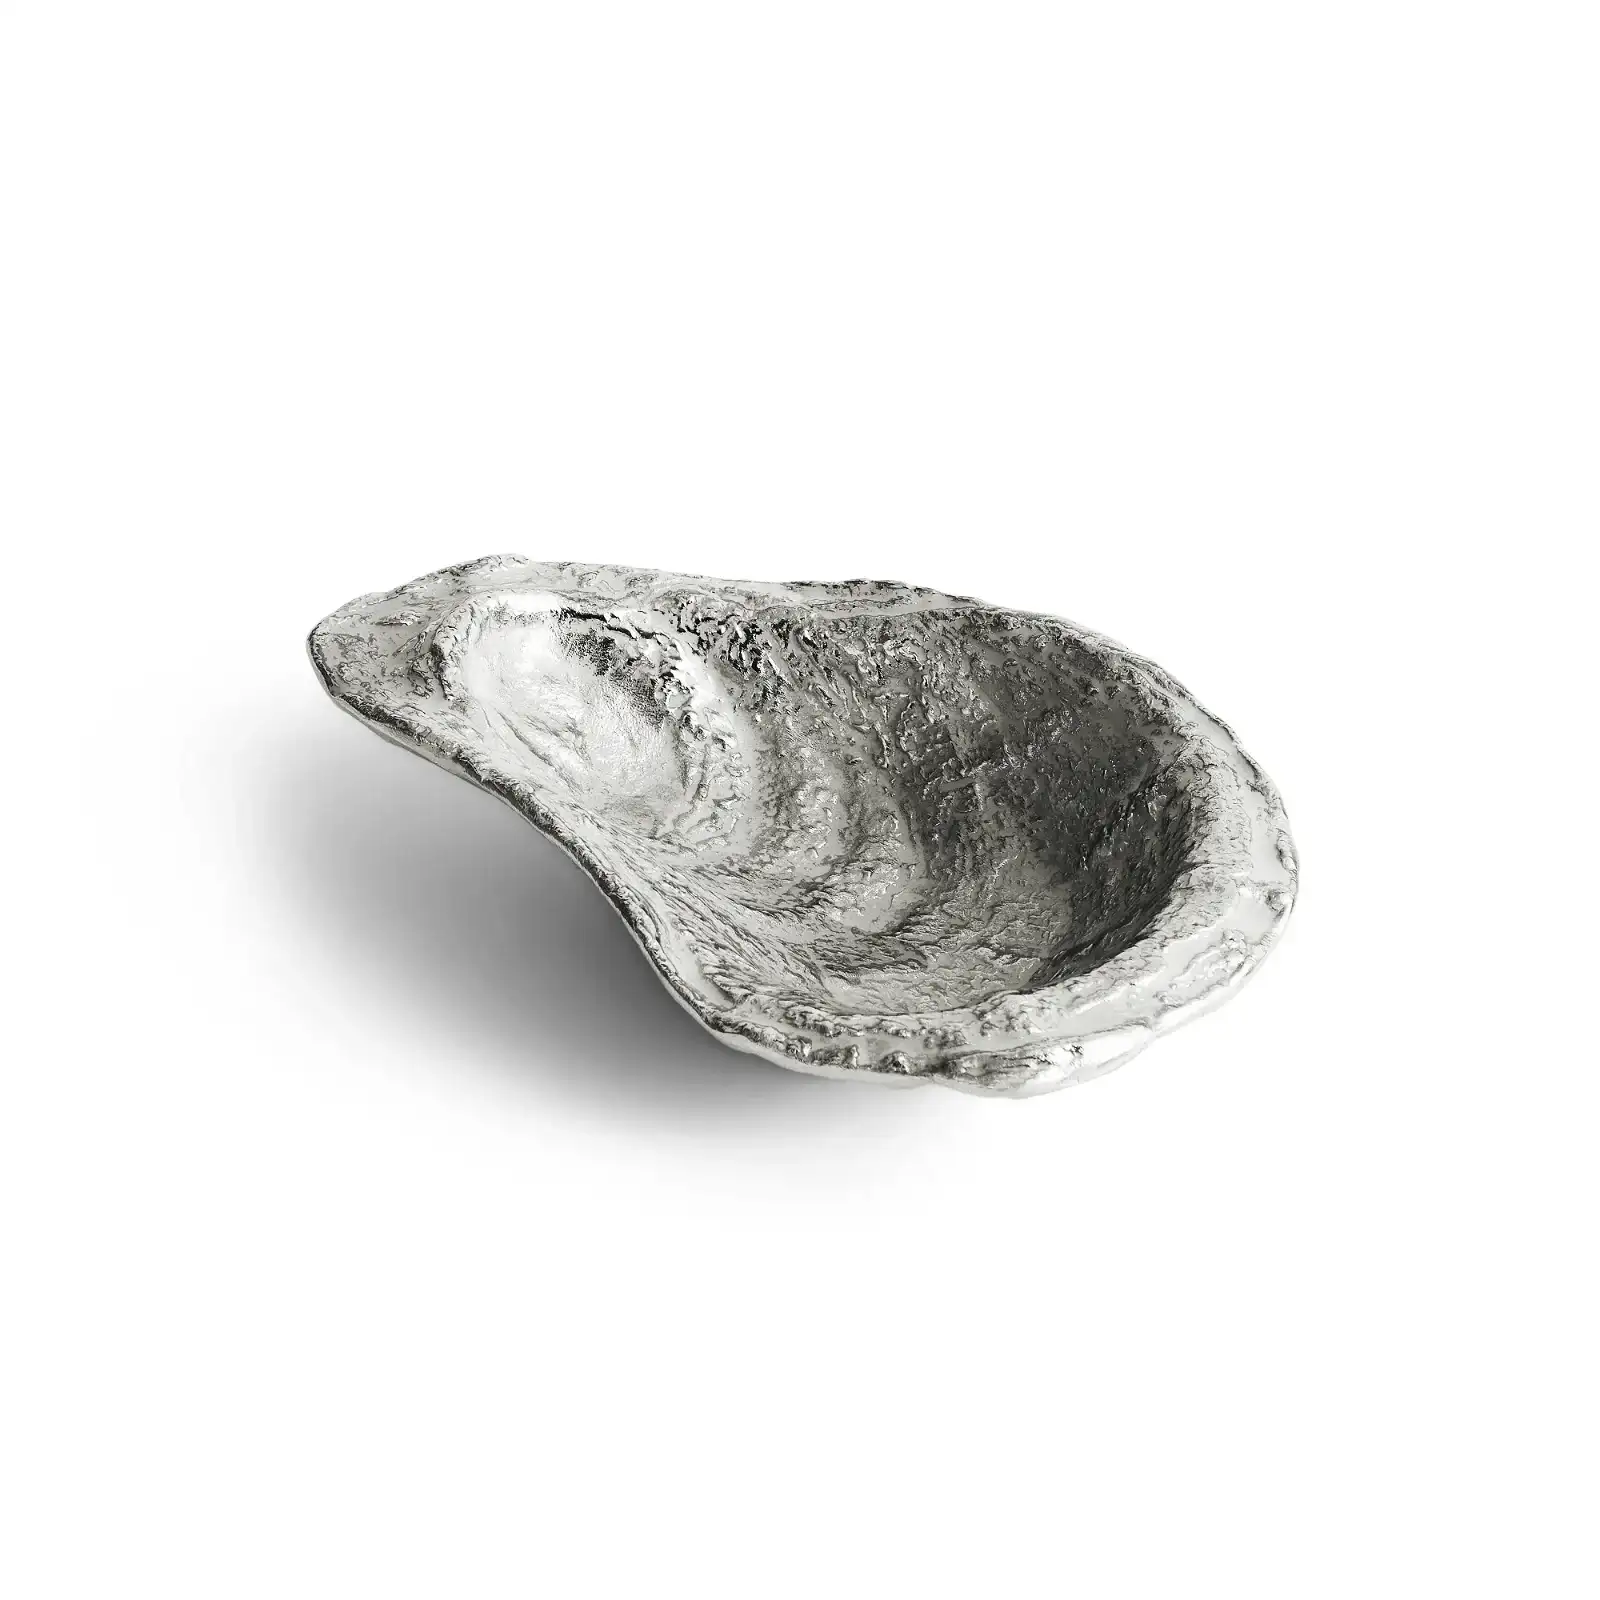 Image of Ocean Reef Oyster Nut Dish